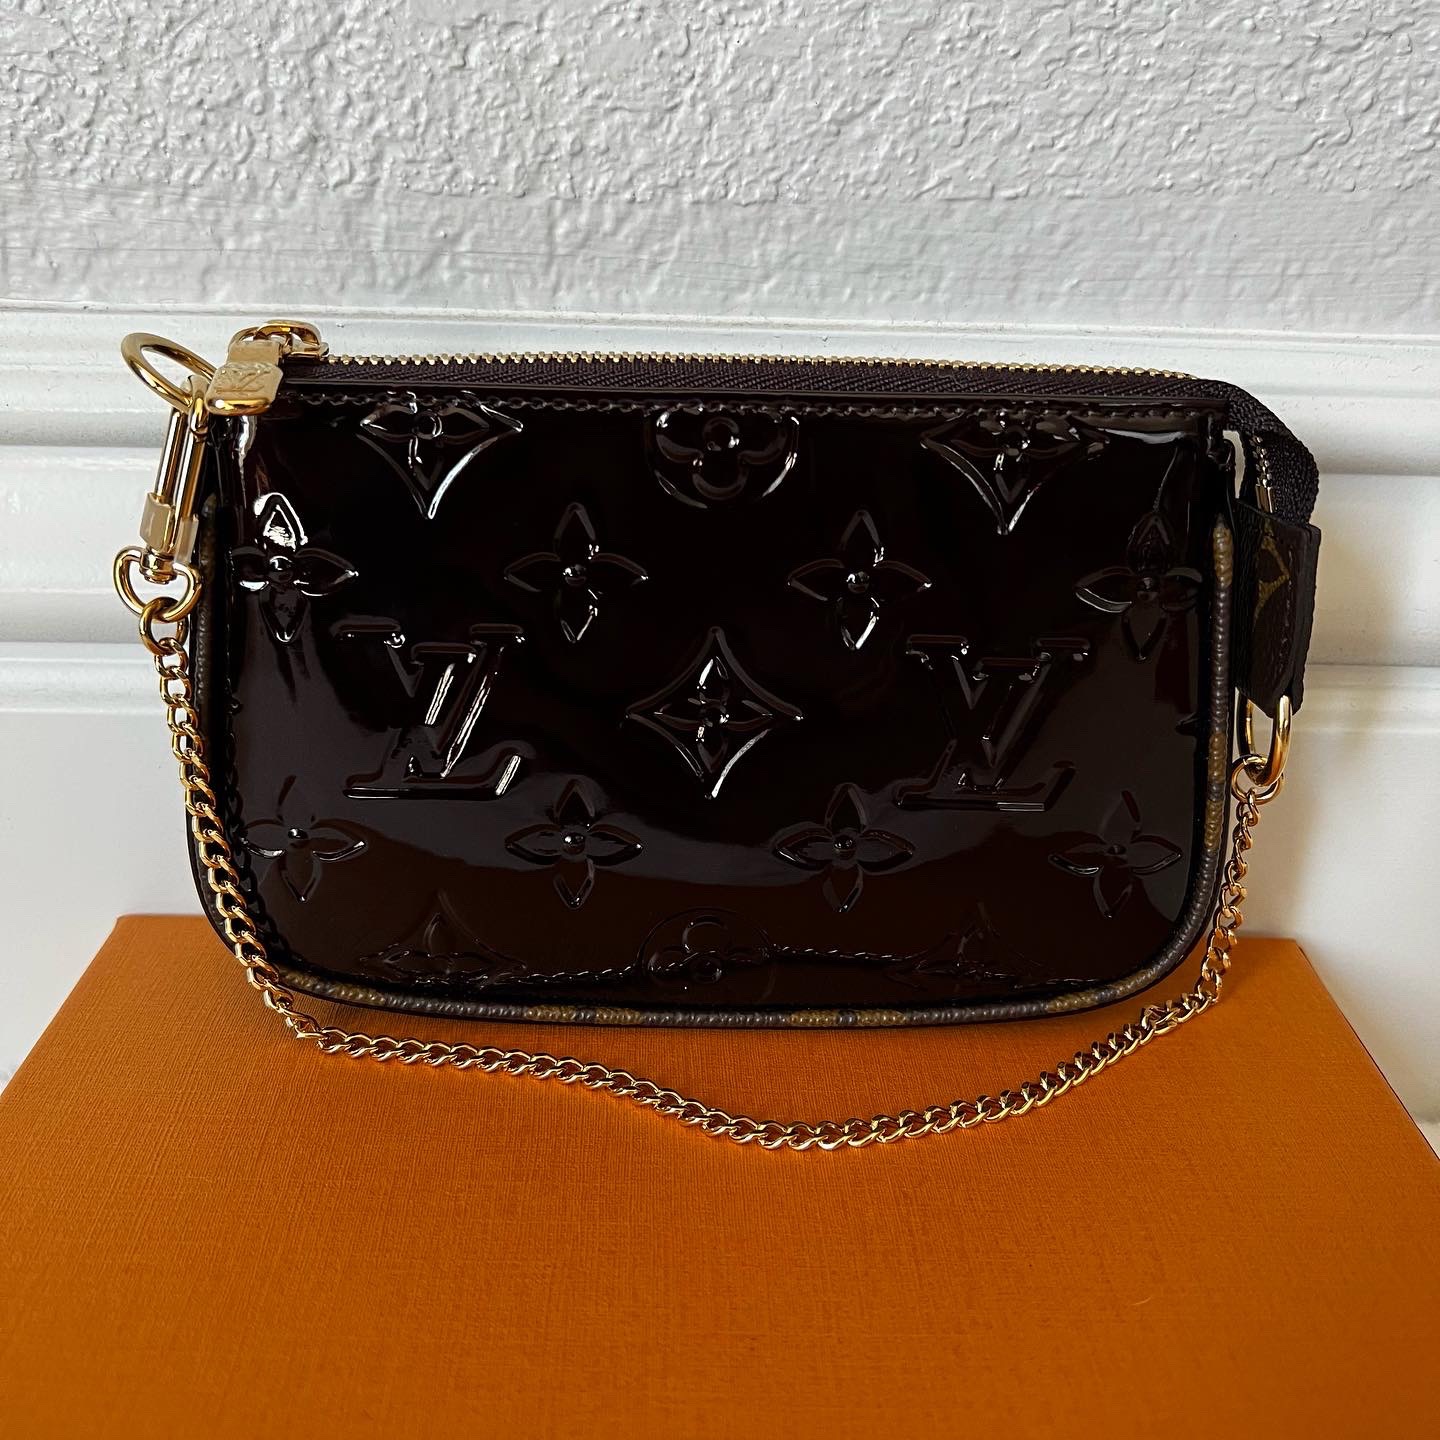 BN AUTHENTIC LV MINI POCHETTE IN VERNIS LEATHER WITH GOLD HARDWARE – Mi  Reyna Fashion Lover